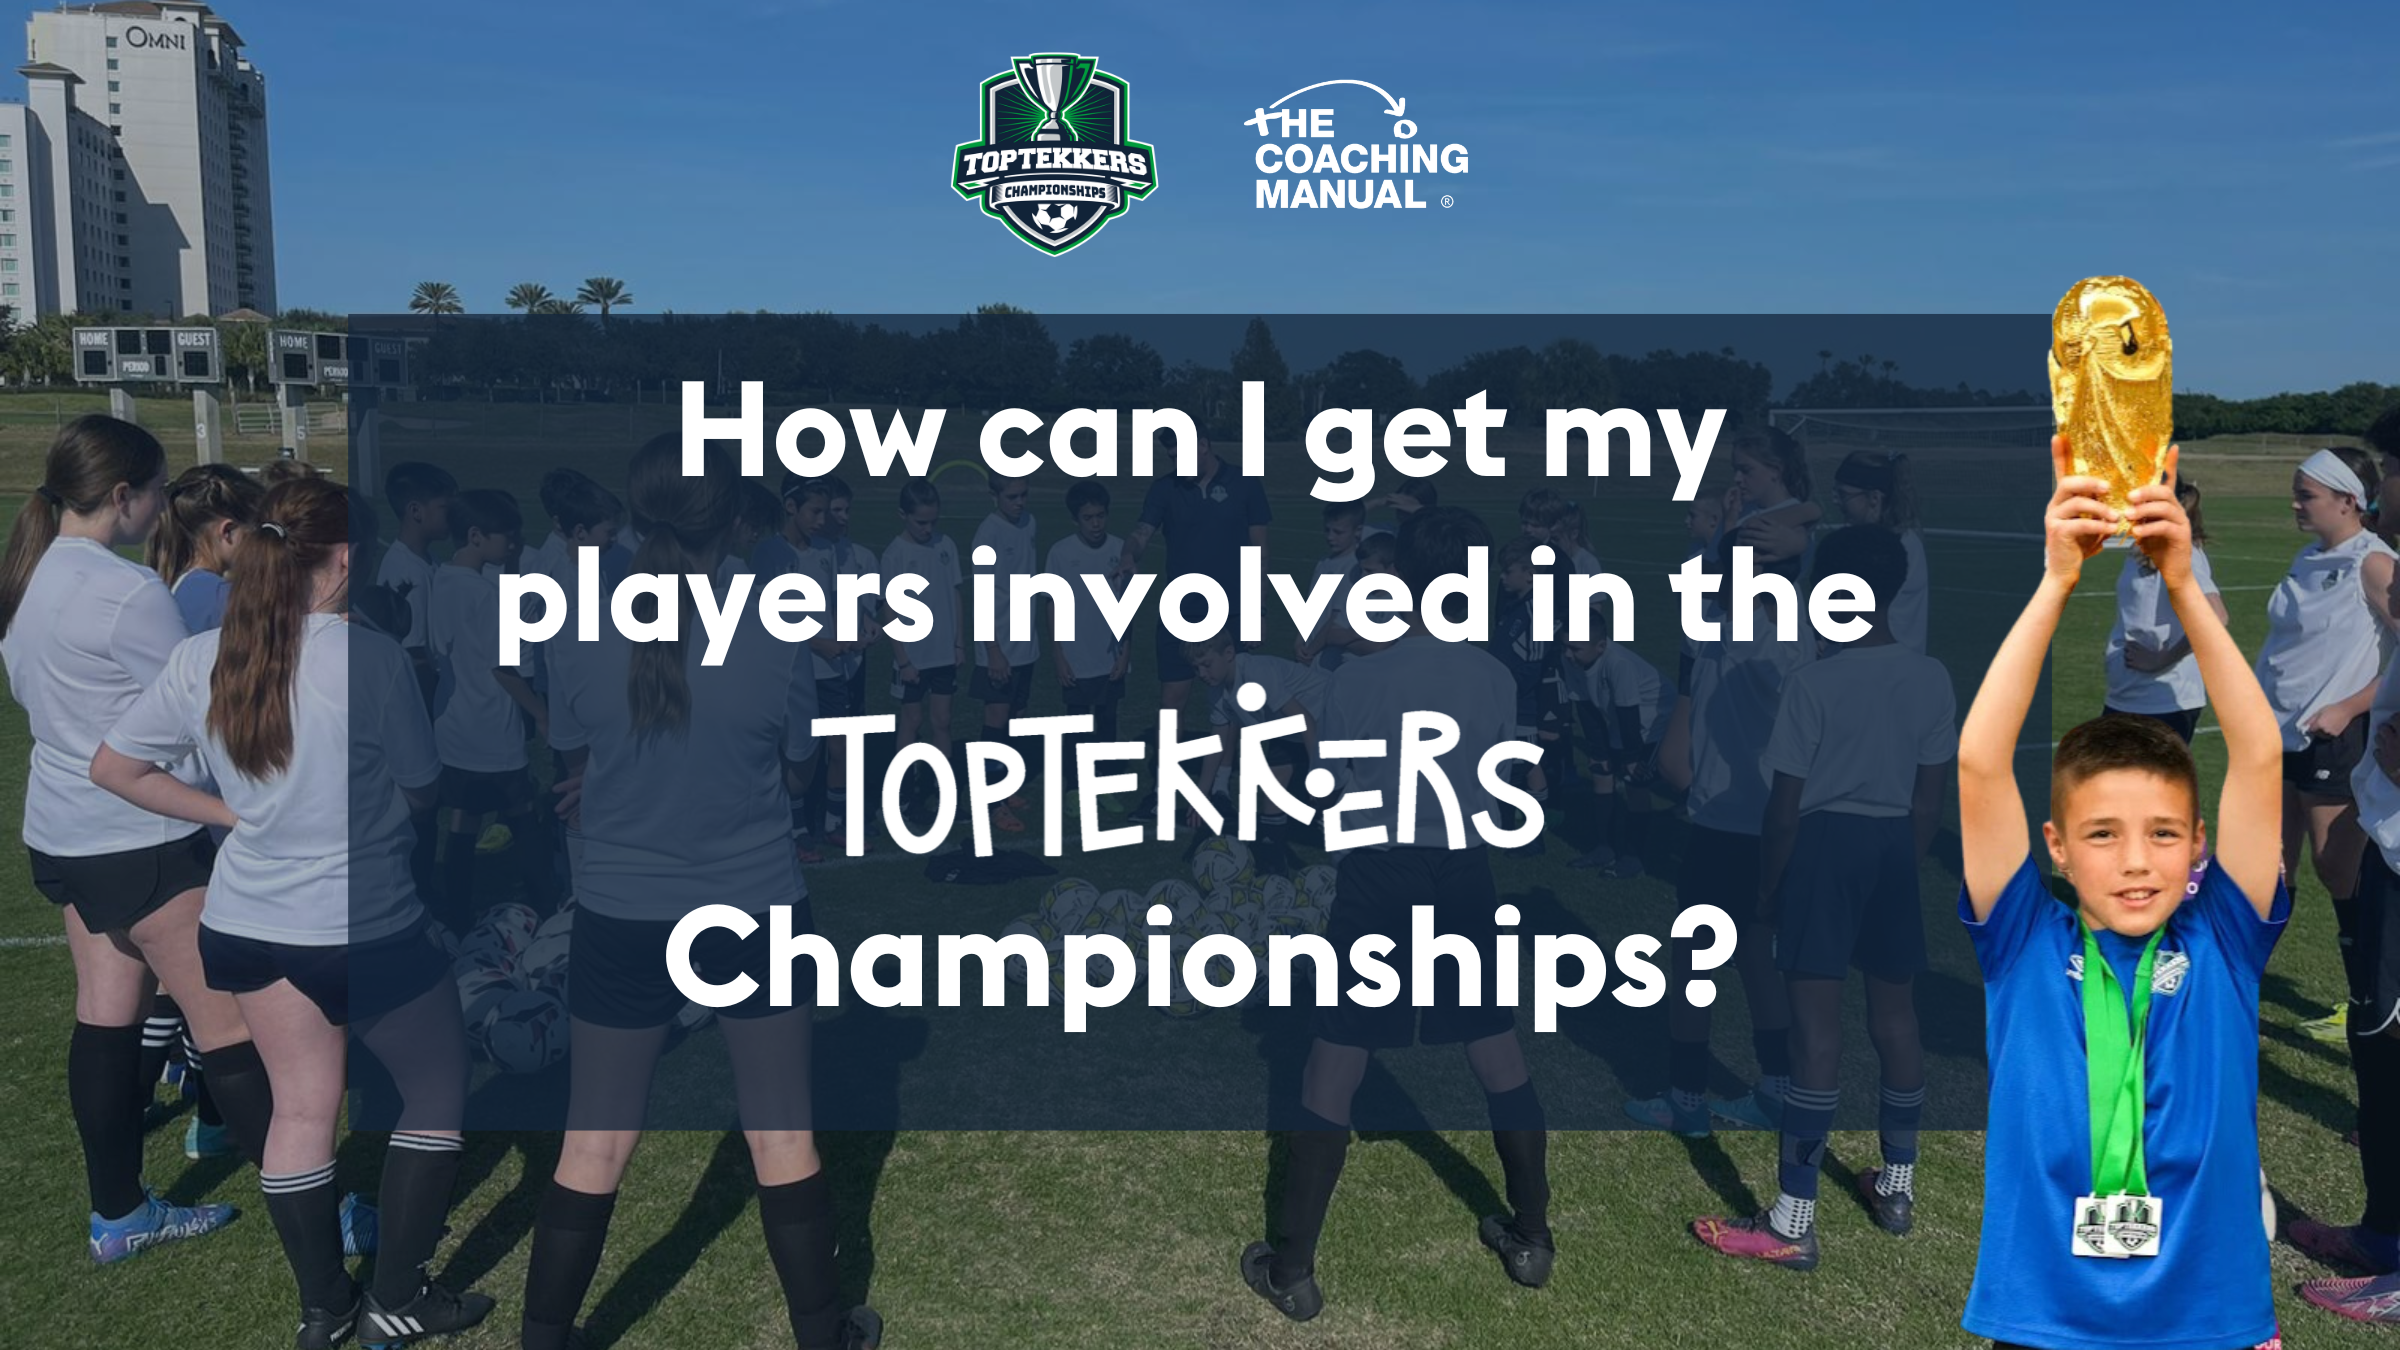 How can I get my players involved in the TopTekkers Championships?